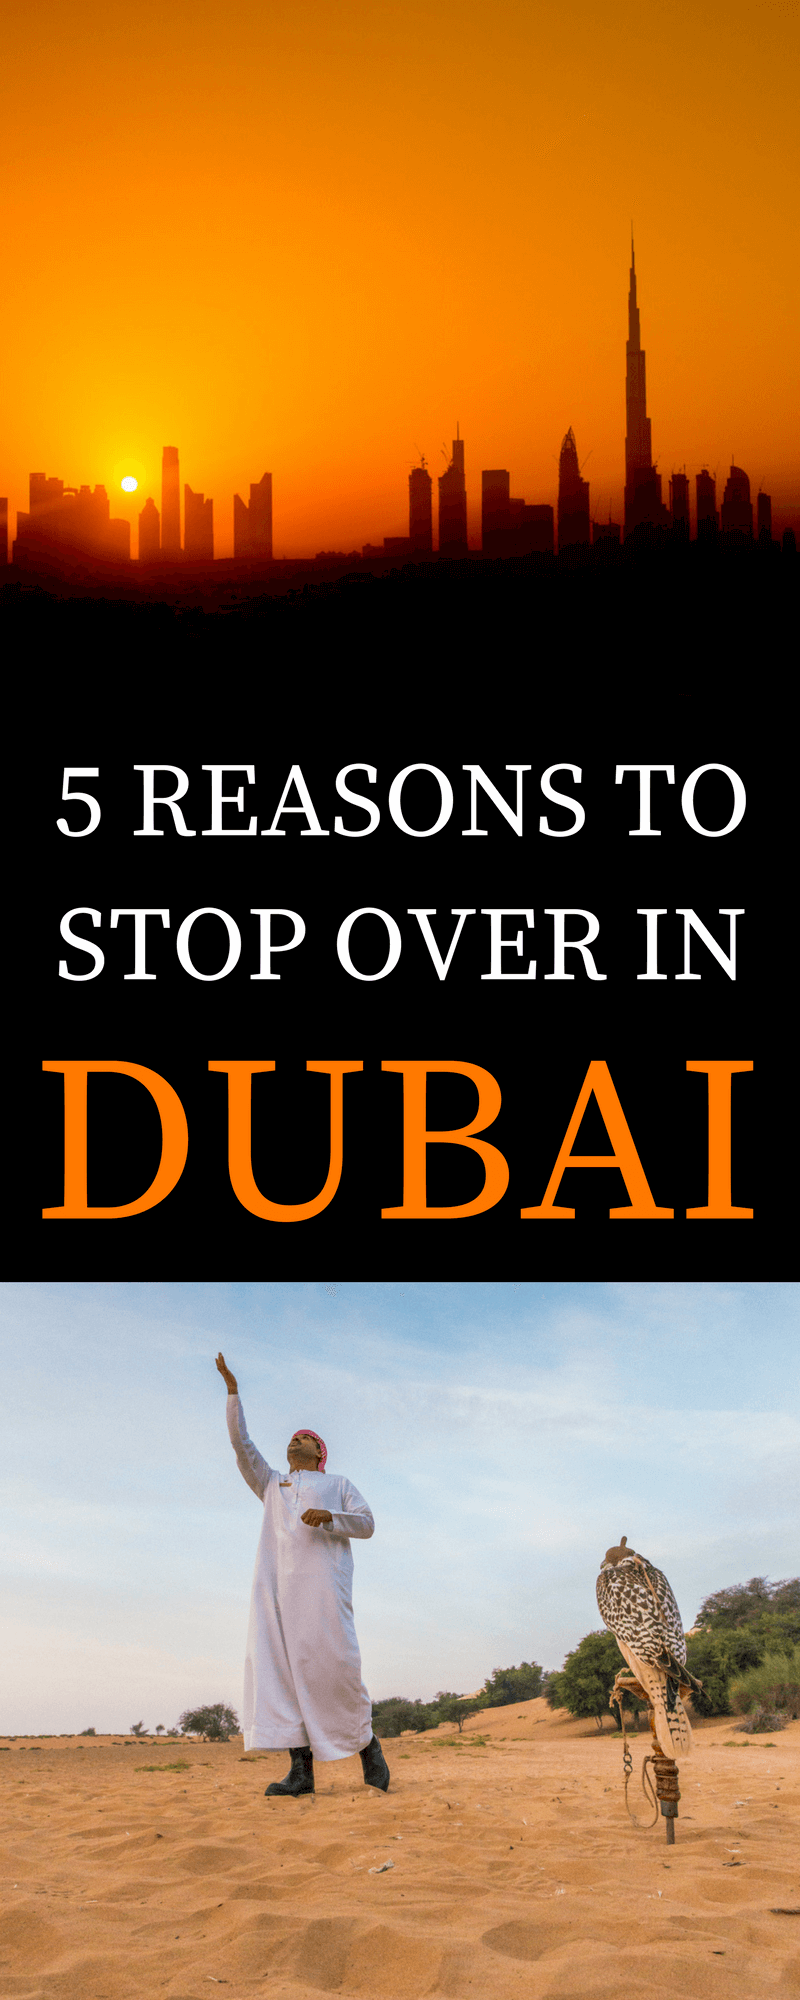 Dubai's not my favorite city, but it's increasingly attractive as a layover city for a few days. Here's why.